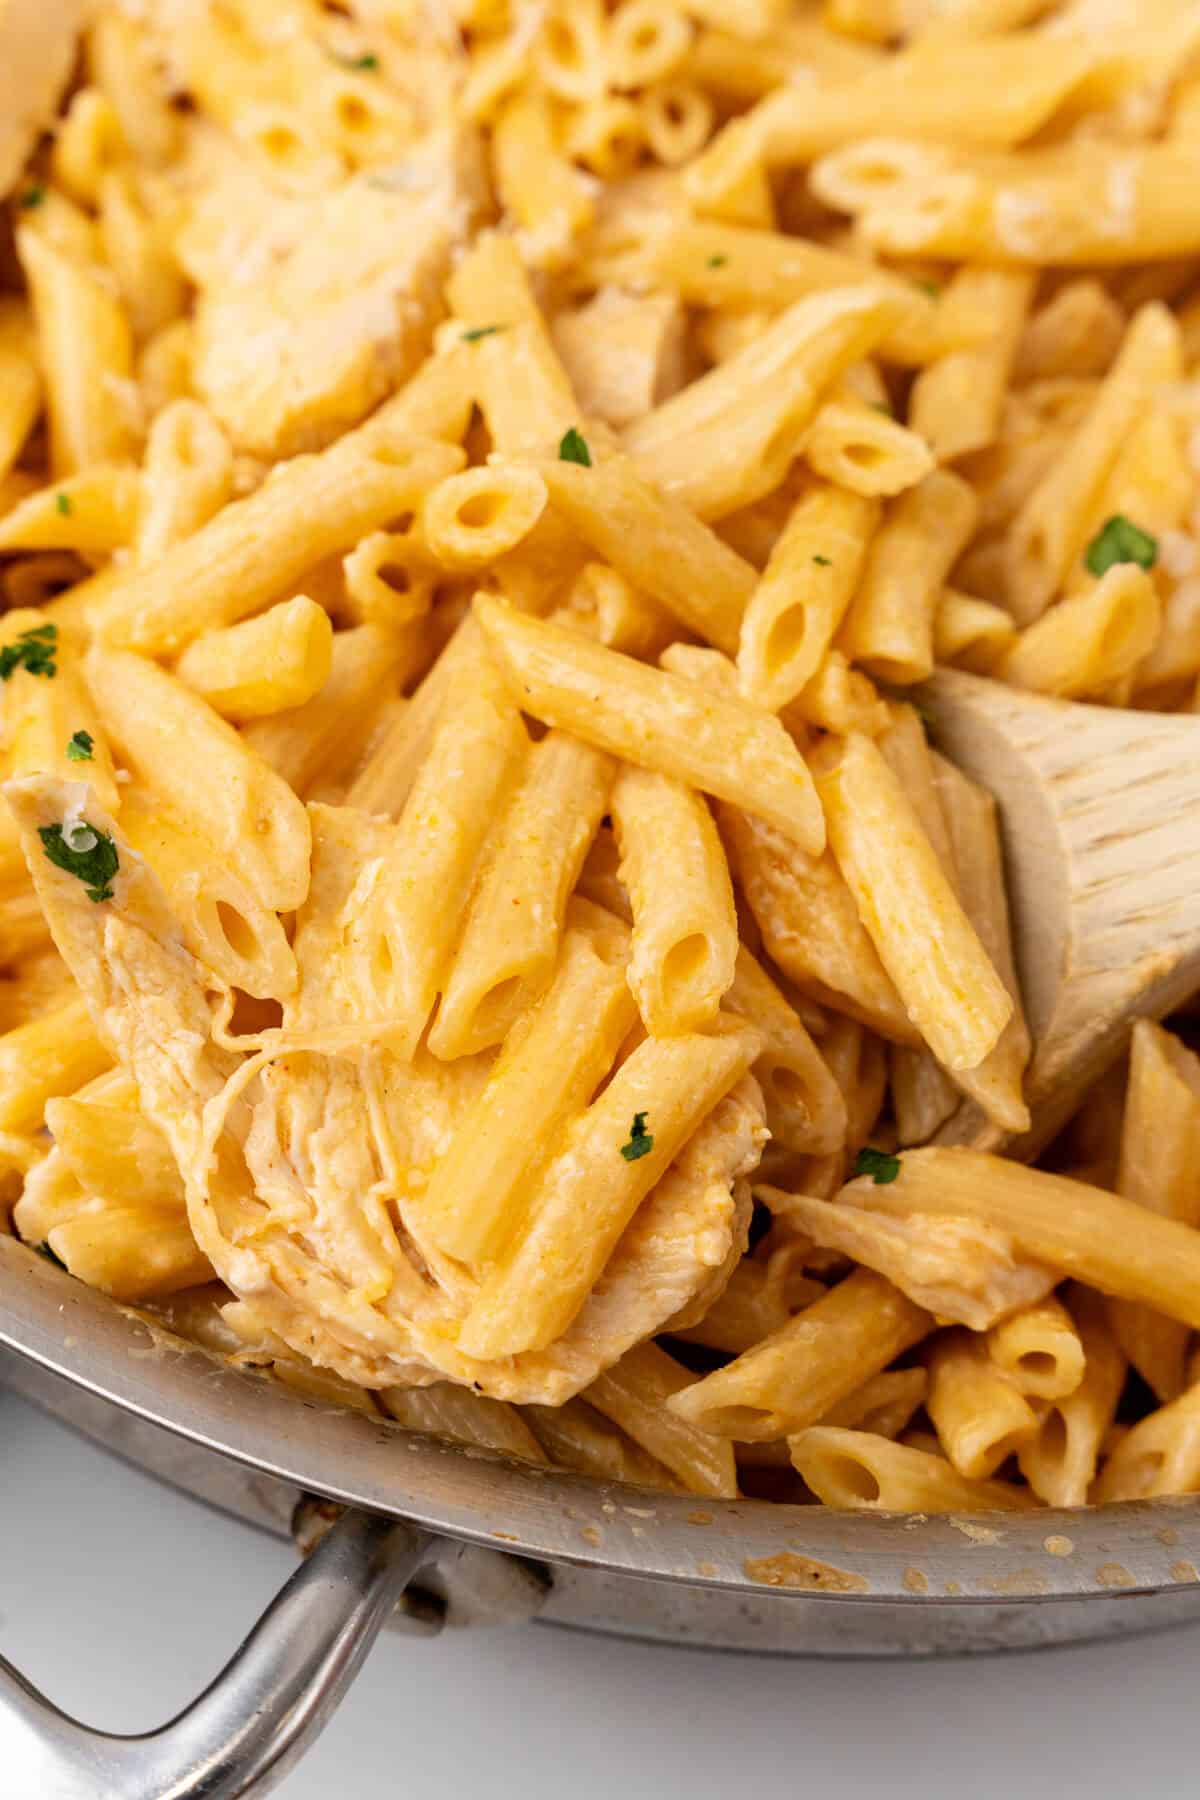 Creamy Buffalo Chicken Alfredo pasta dish in a skillet with a wooden spoon.